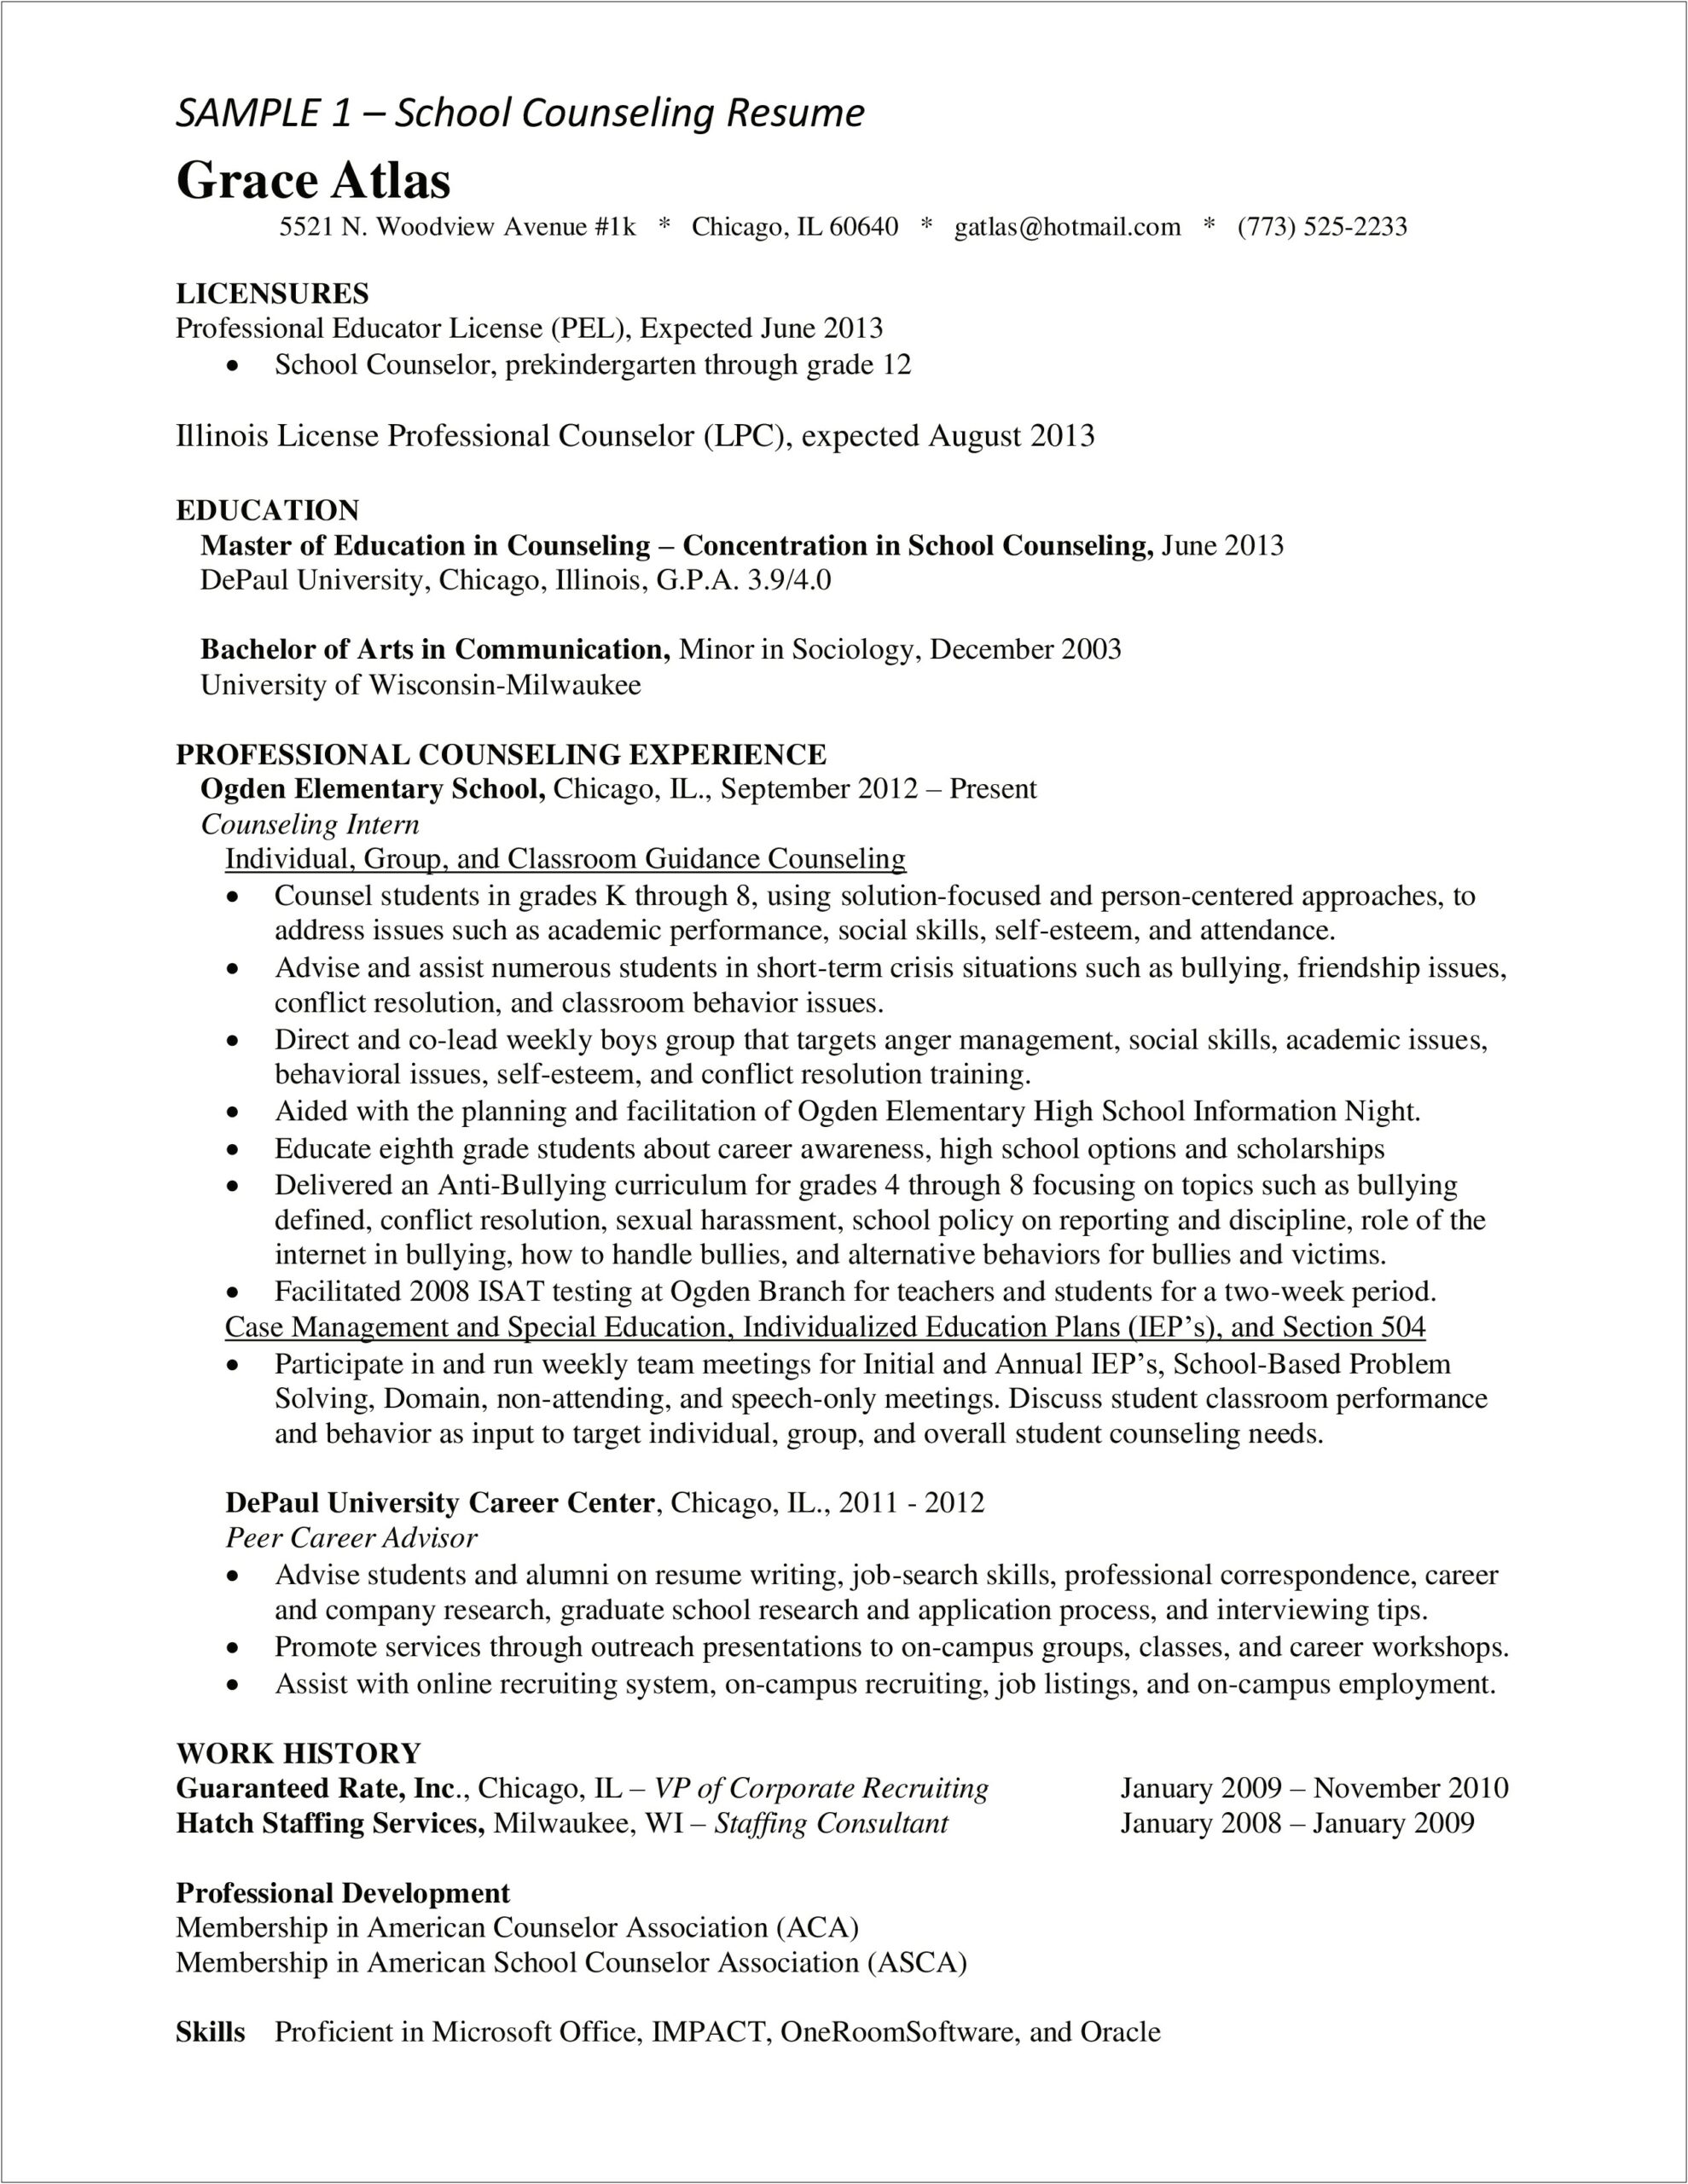 Sample Resume For Education Counselor